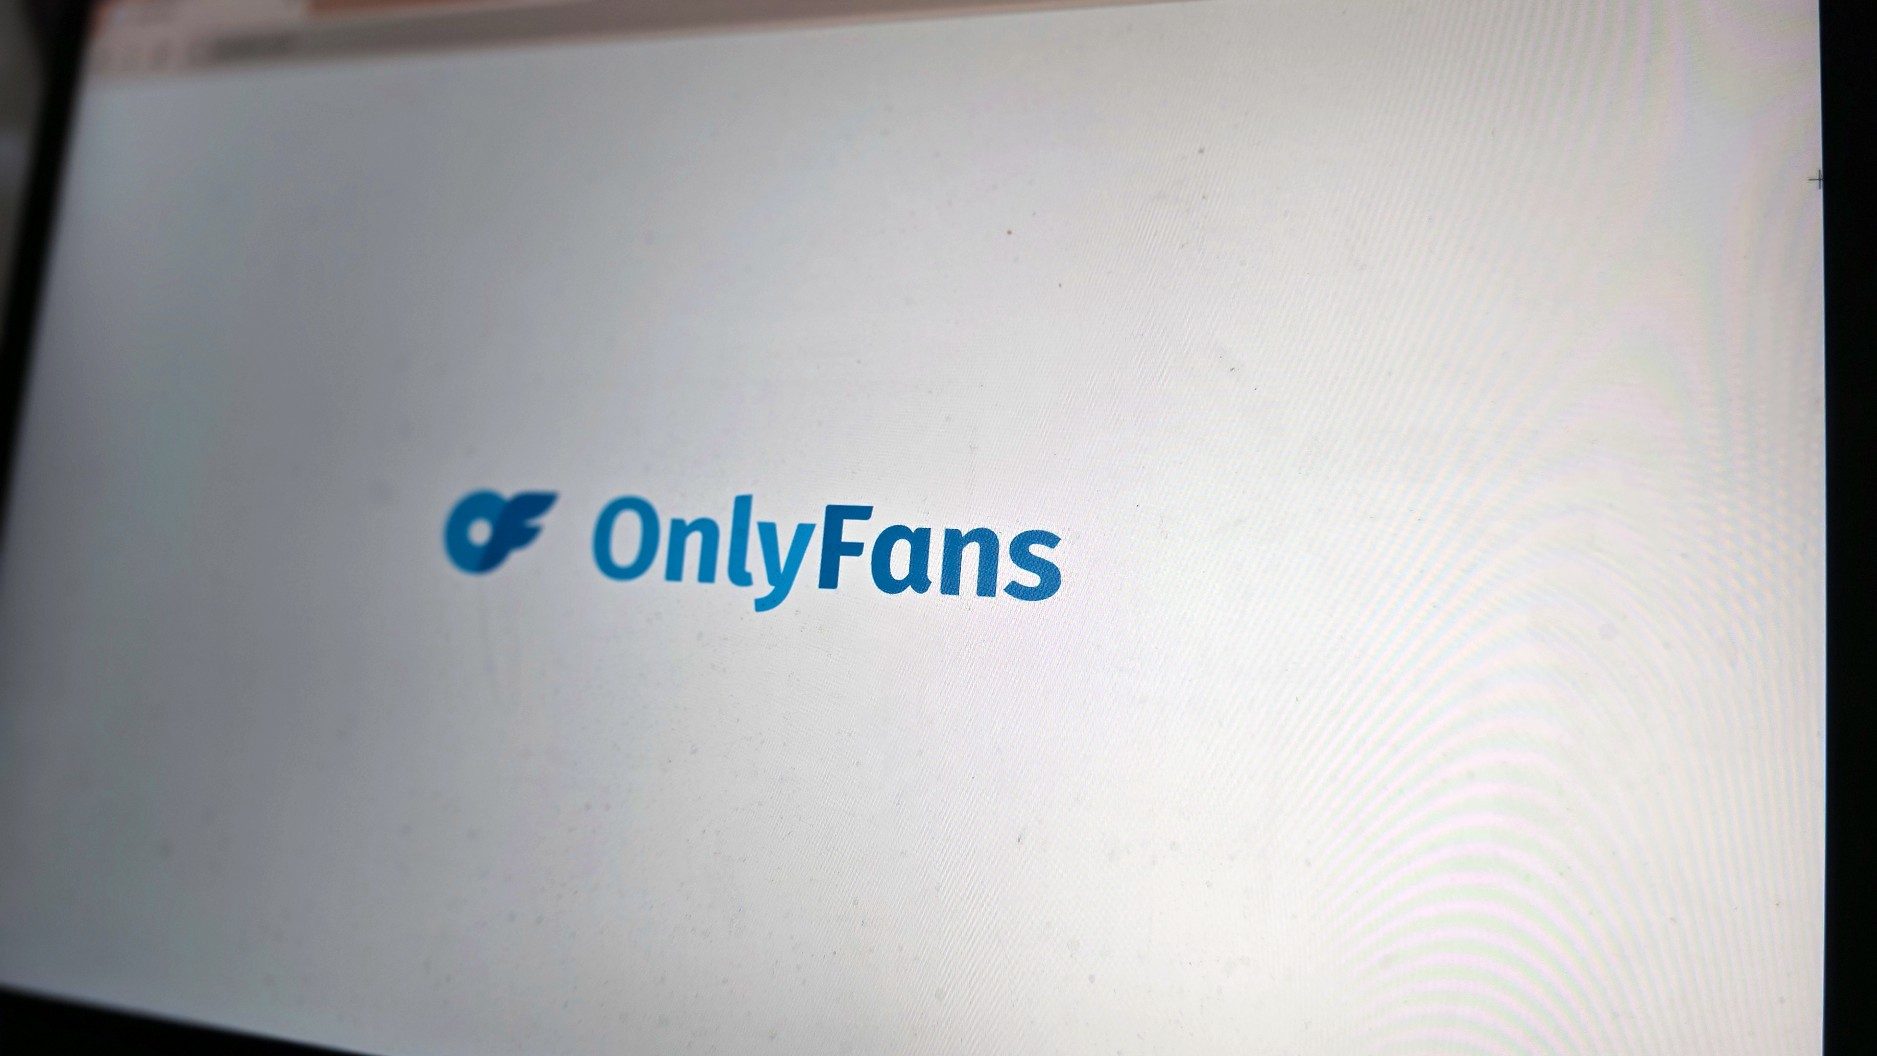 OnlyFans vows it’s a safe space. Predators exploit kids there